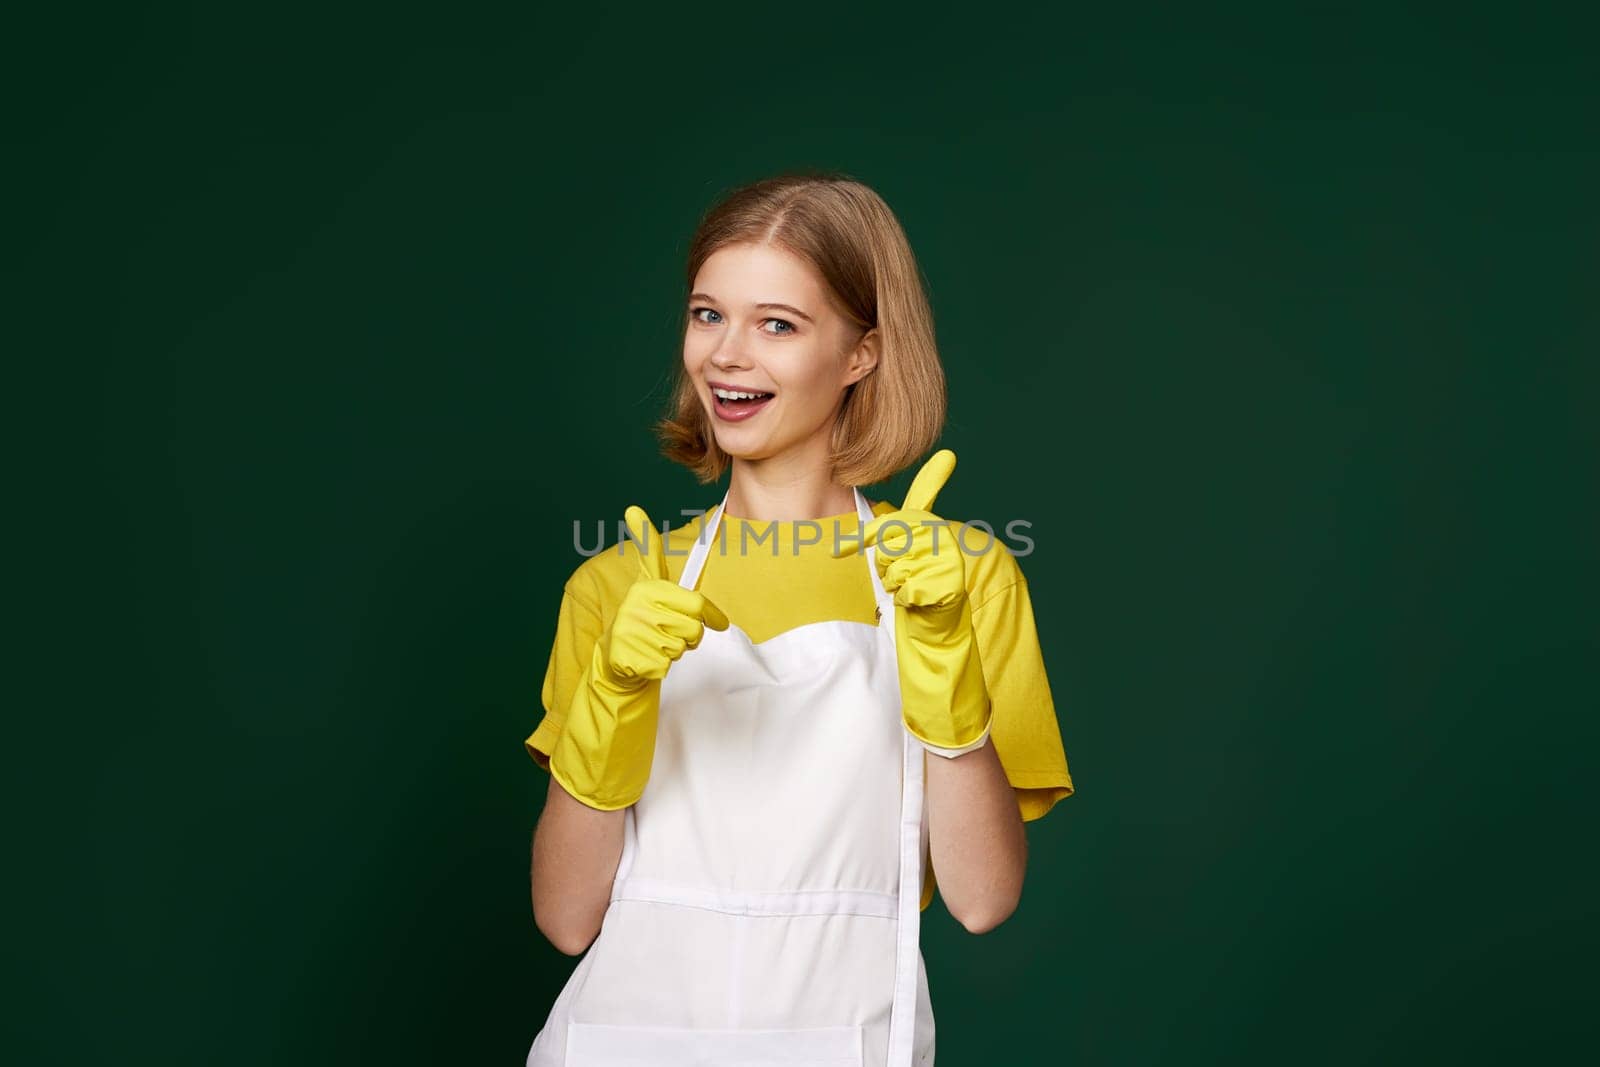 beautiful blonde woman in yellow rubber gloves and cleaner apron showing ok sign on green background.